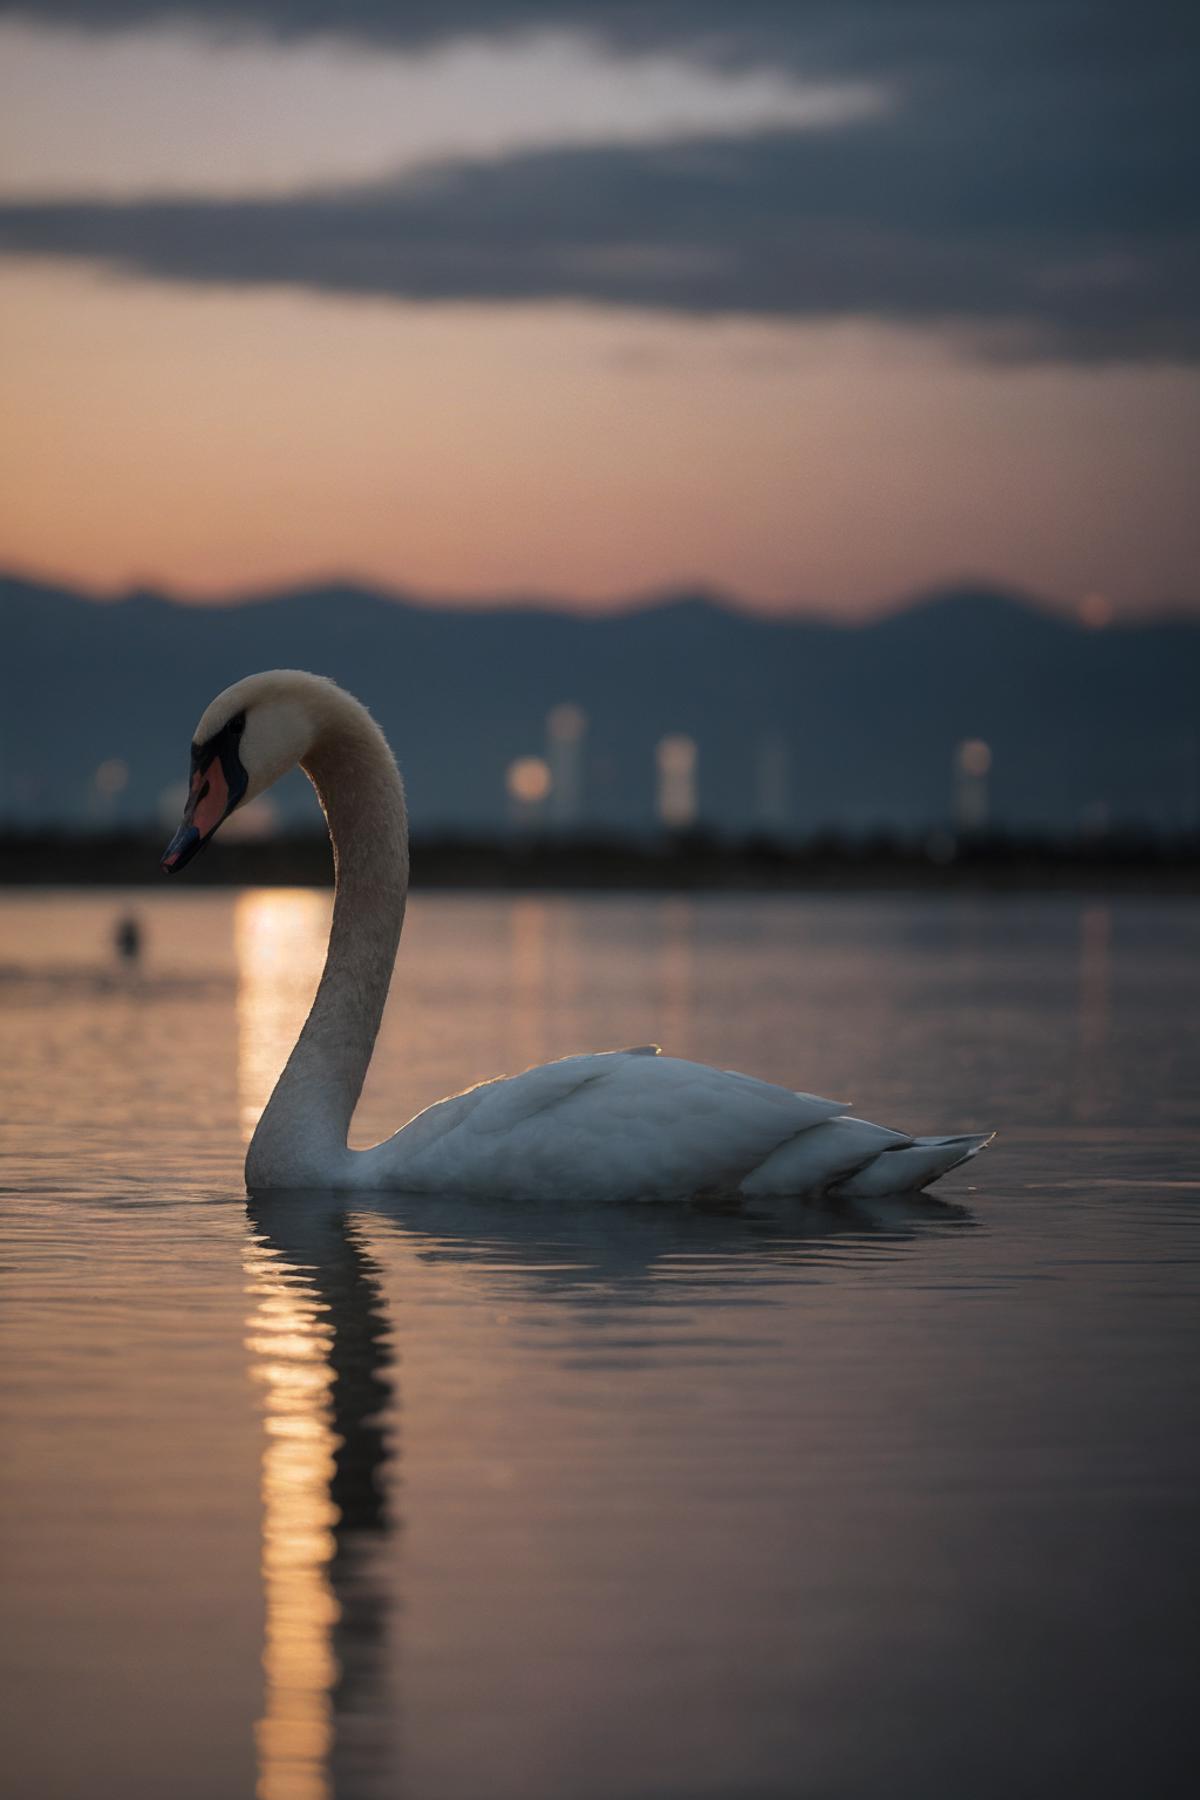 A swan in a lake at sunset.